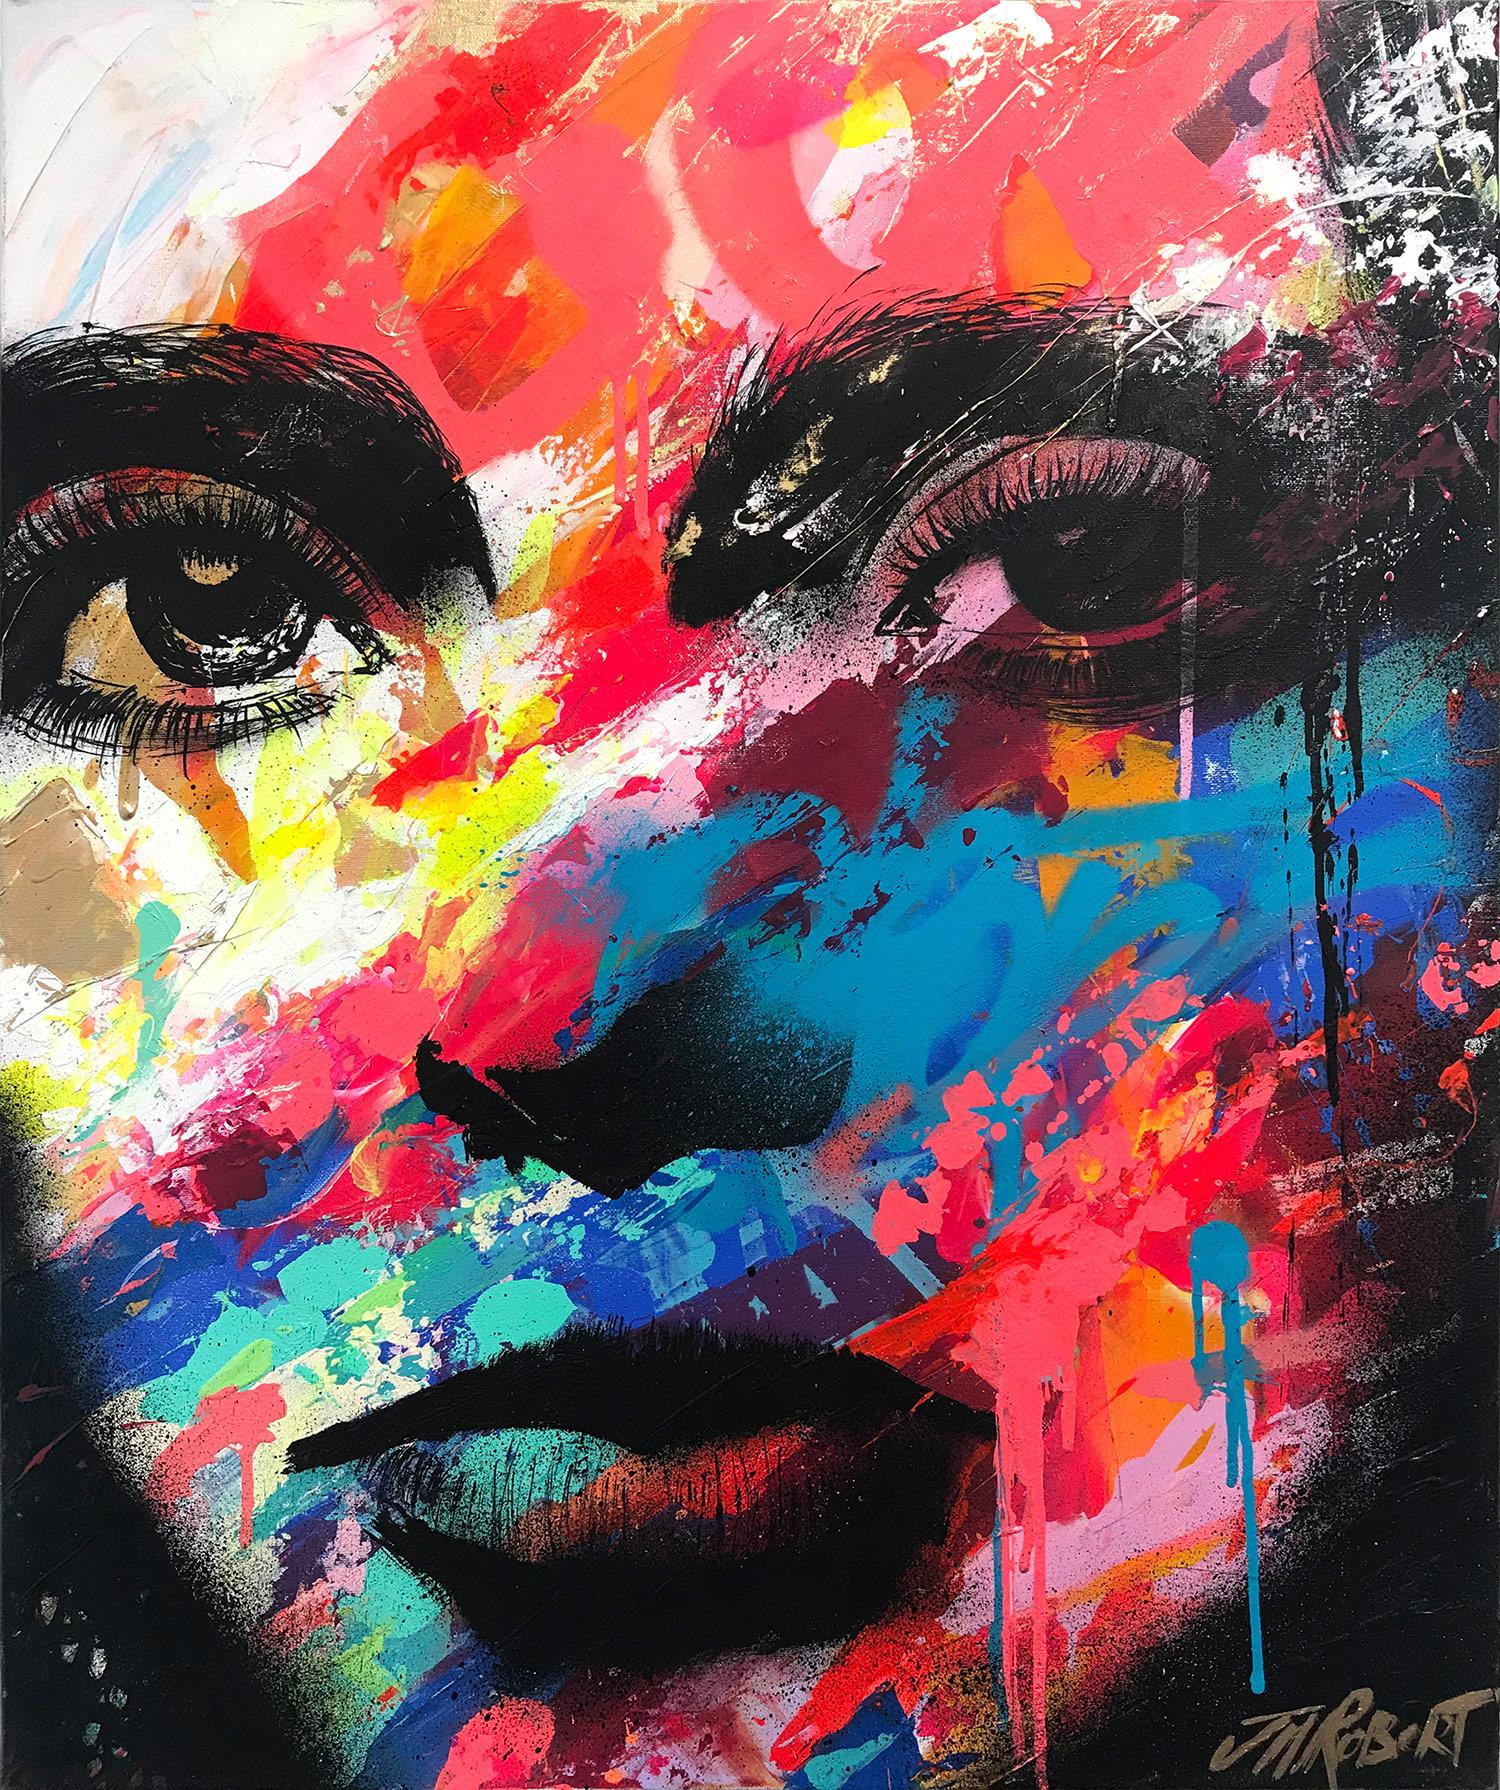 J.M. Robert Abstract Painting - “Elle Fait Face” She Faces, Colorful, Abstract Street Art, French Artist